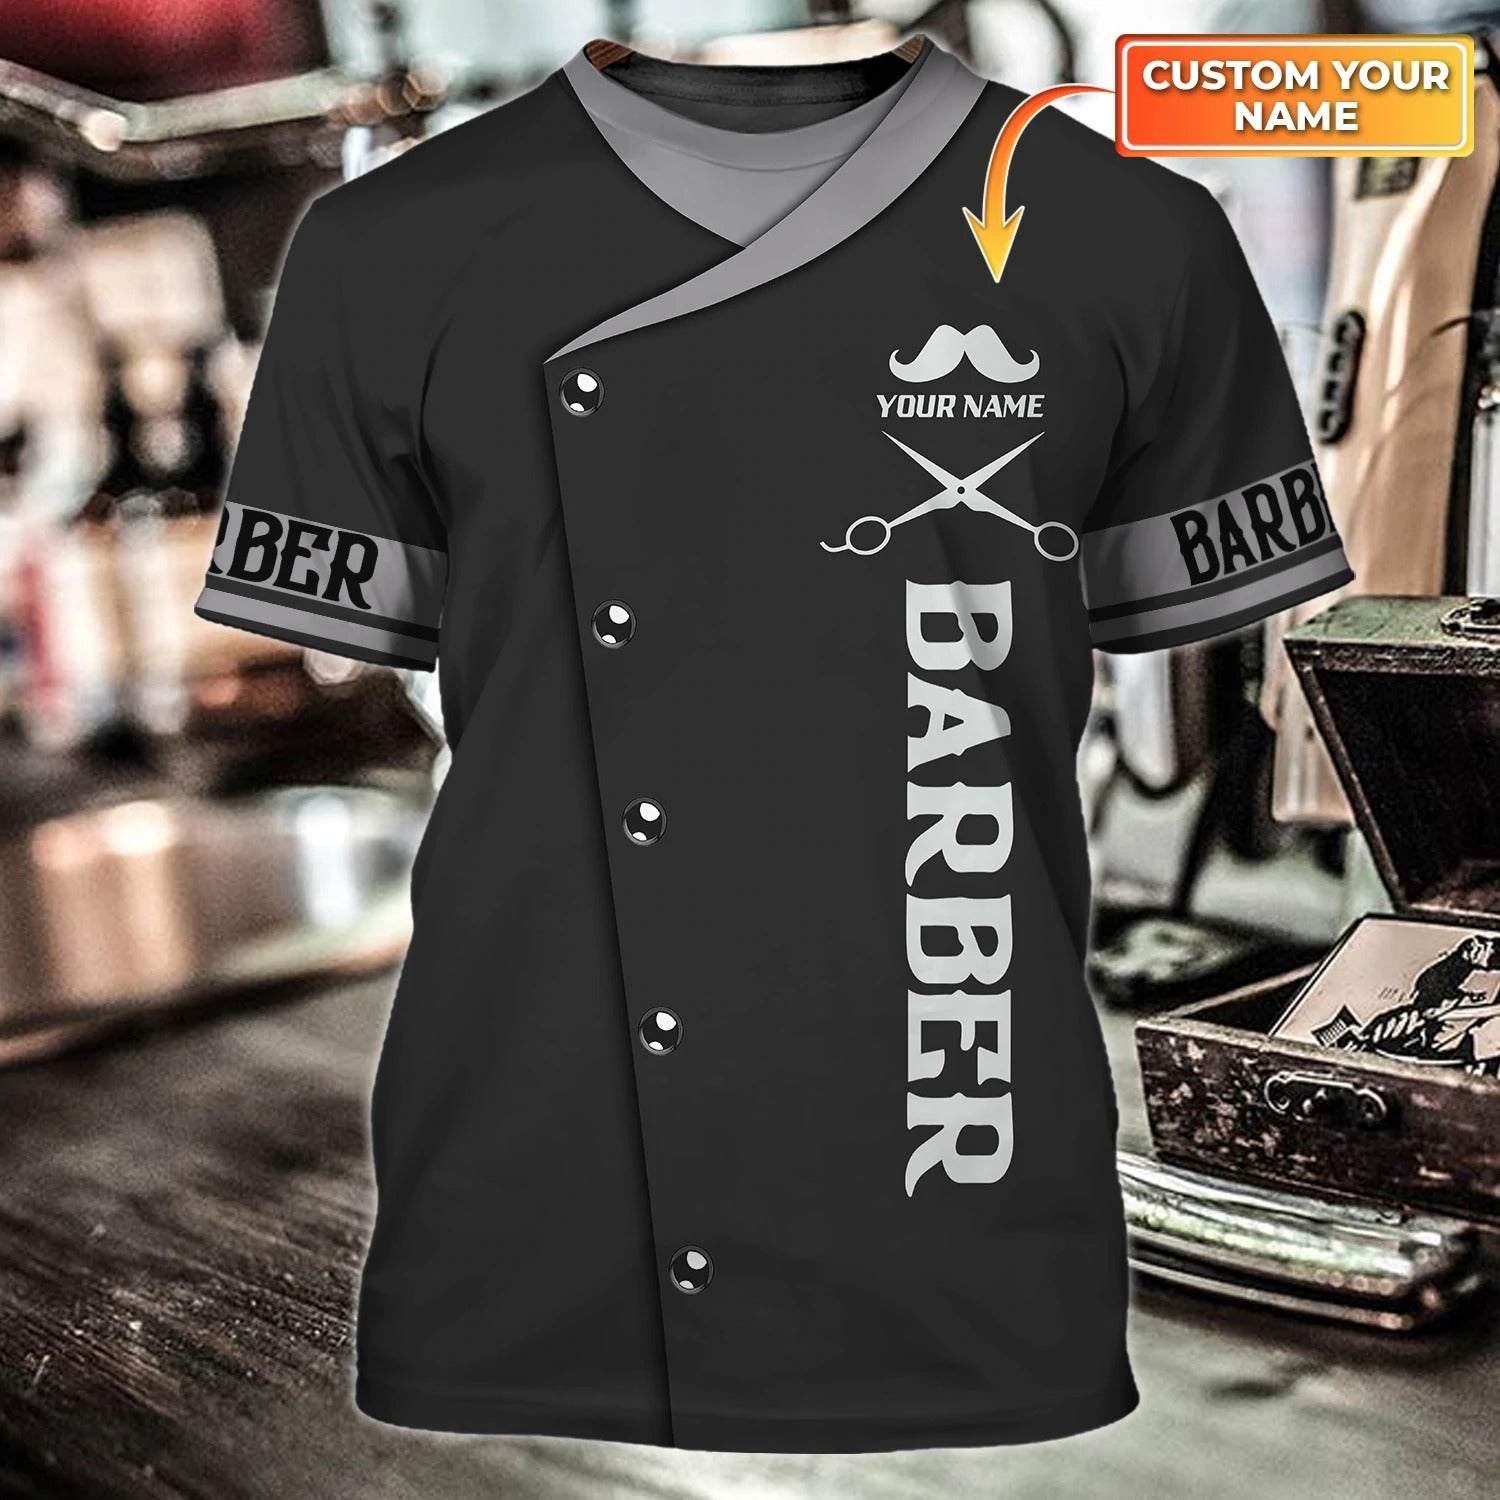 Personalized With Name 3D Full Printed Barber Shirt For Men/ Don